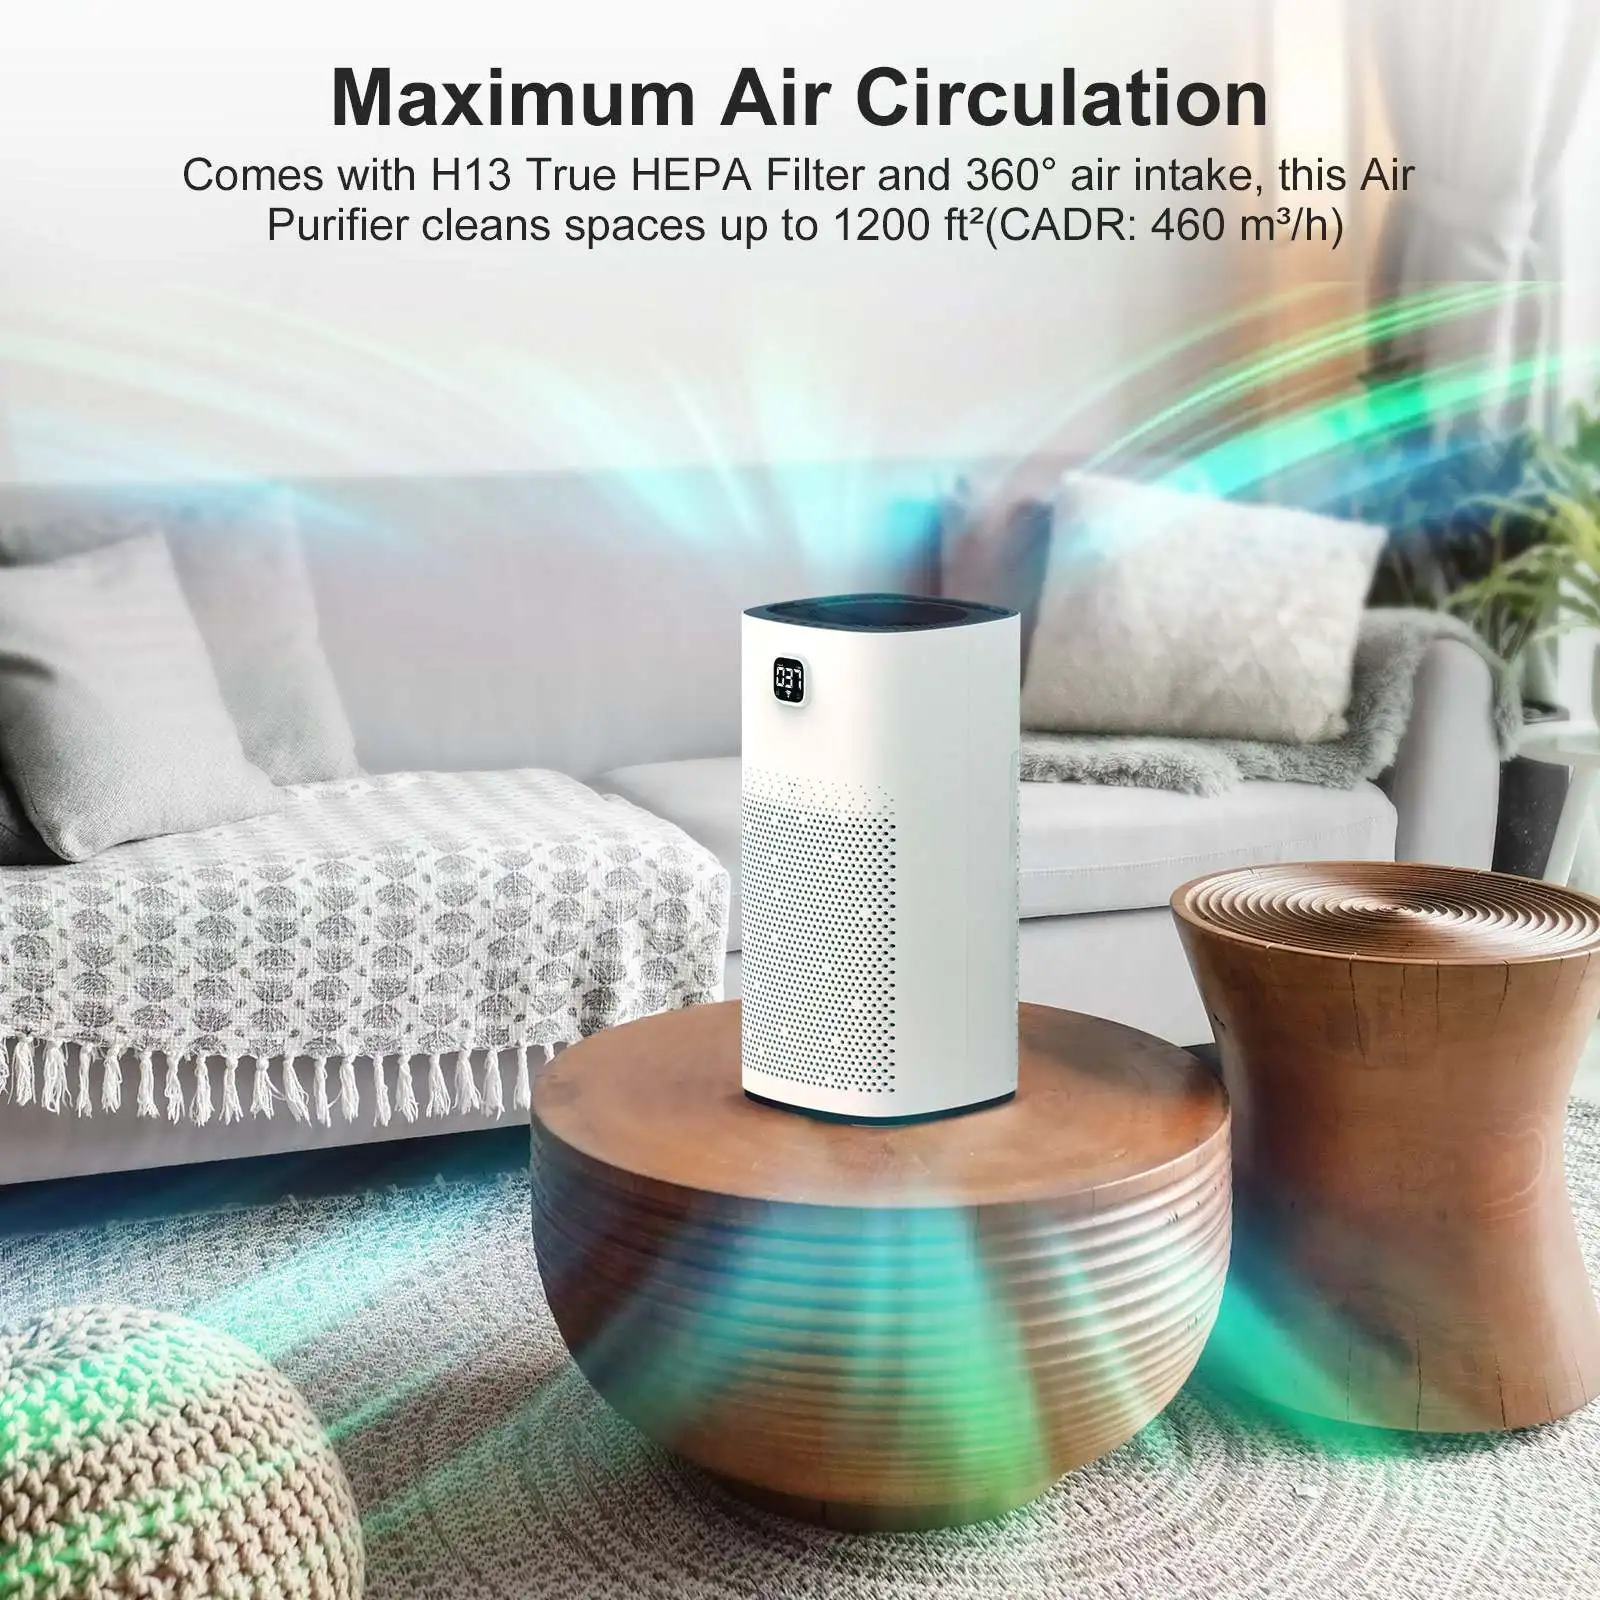 BlitzHome Air Purifier Smart WiFi PM2.5 Monitor H13 True HEPA Filter Quiet Cleaner Odor Eliminators With Google&Alexa Control enlarge